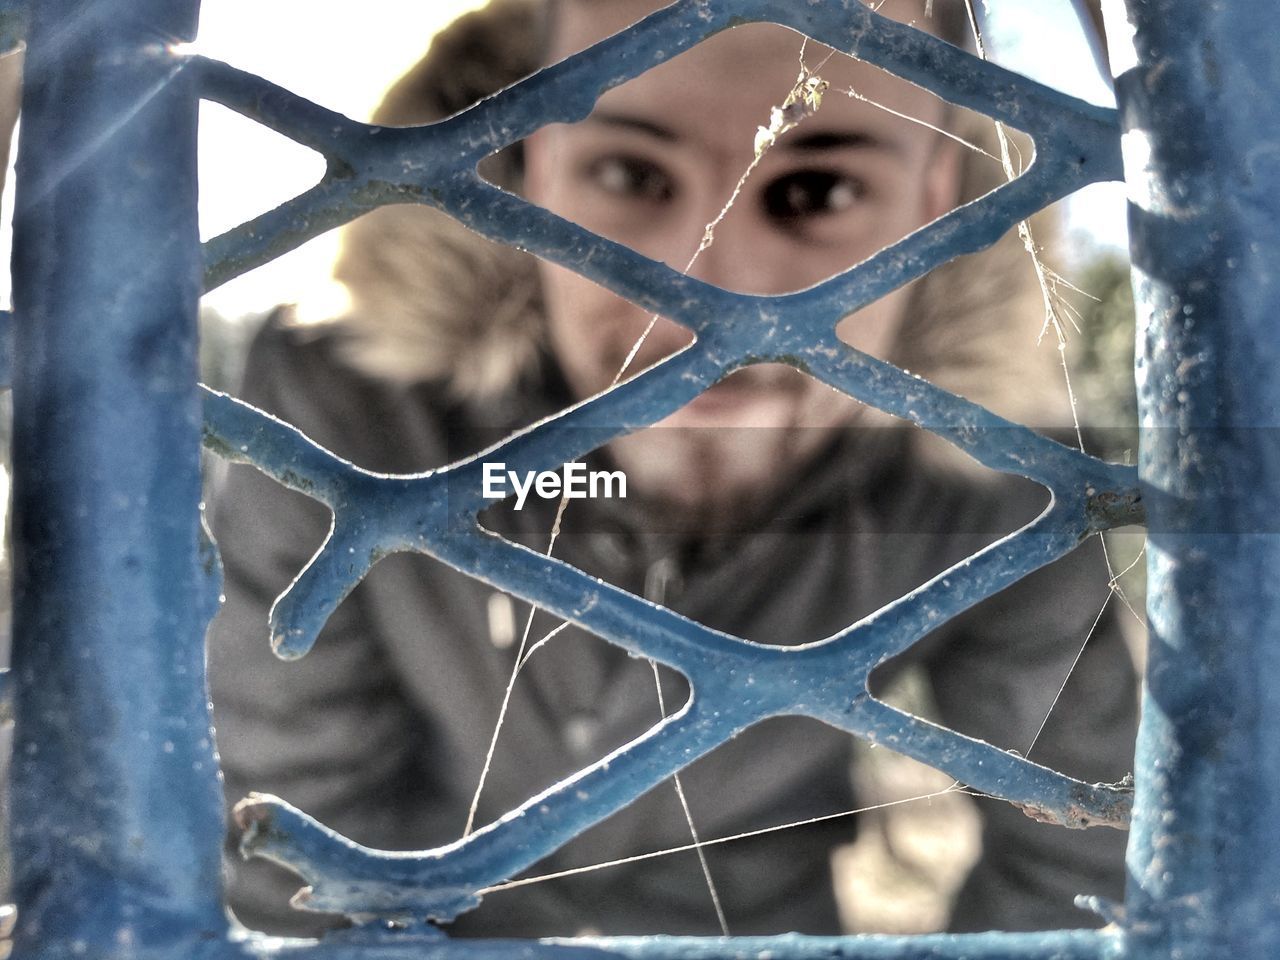 Close-up portrait of man seen through fence during winter